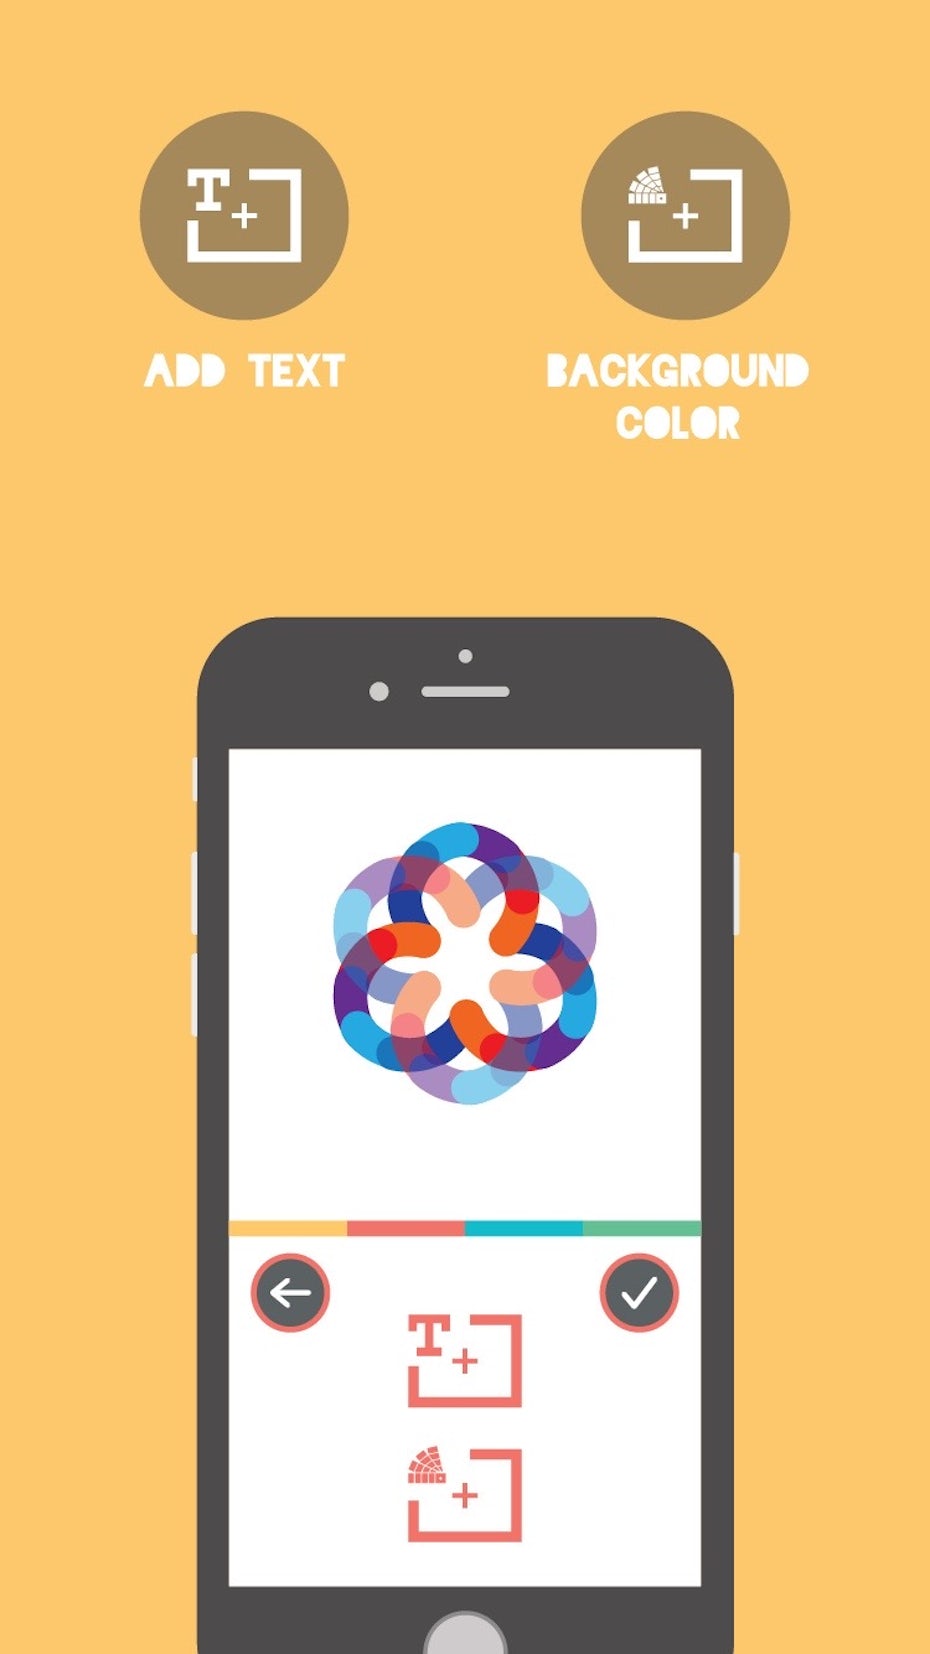 8 best logo design apps to help you build a brand with ...